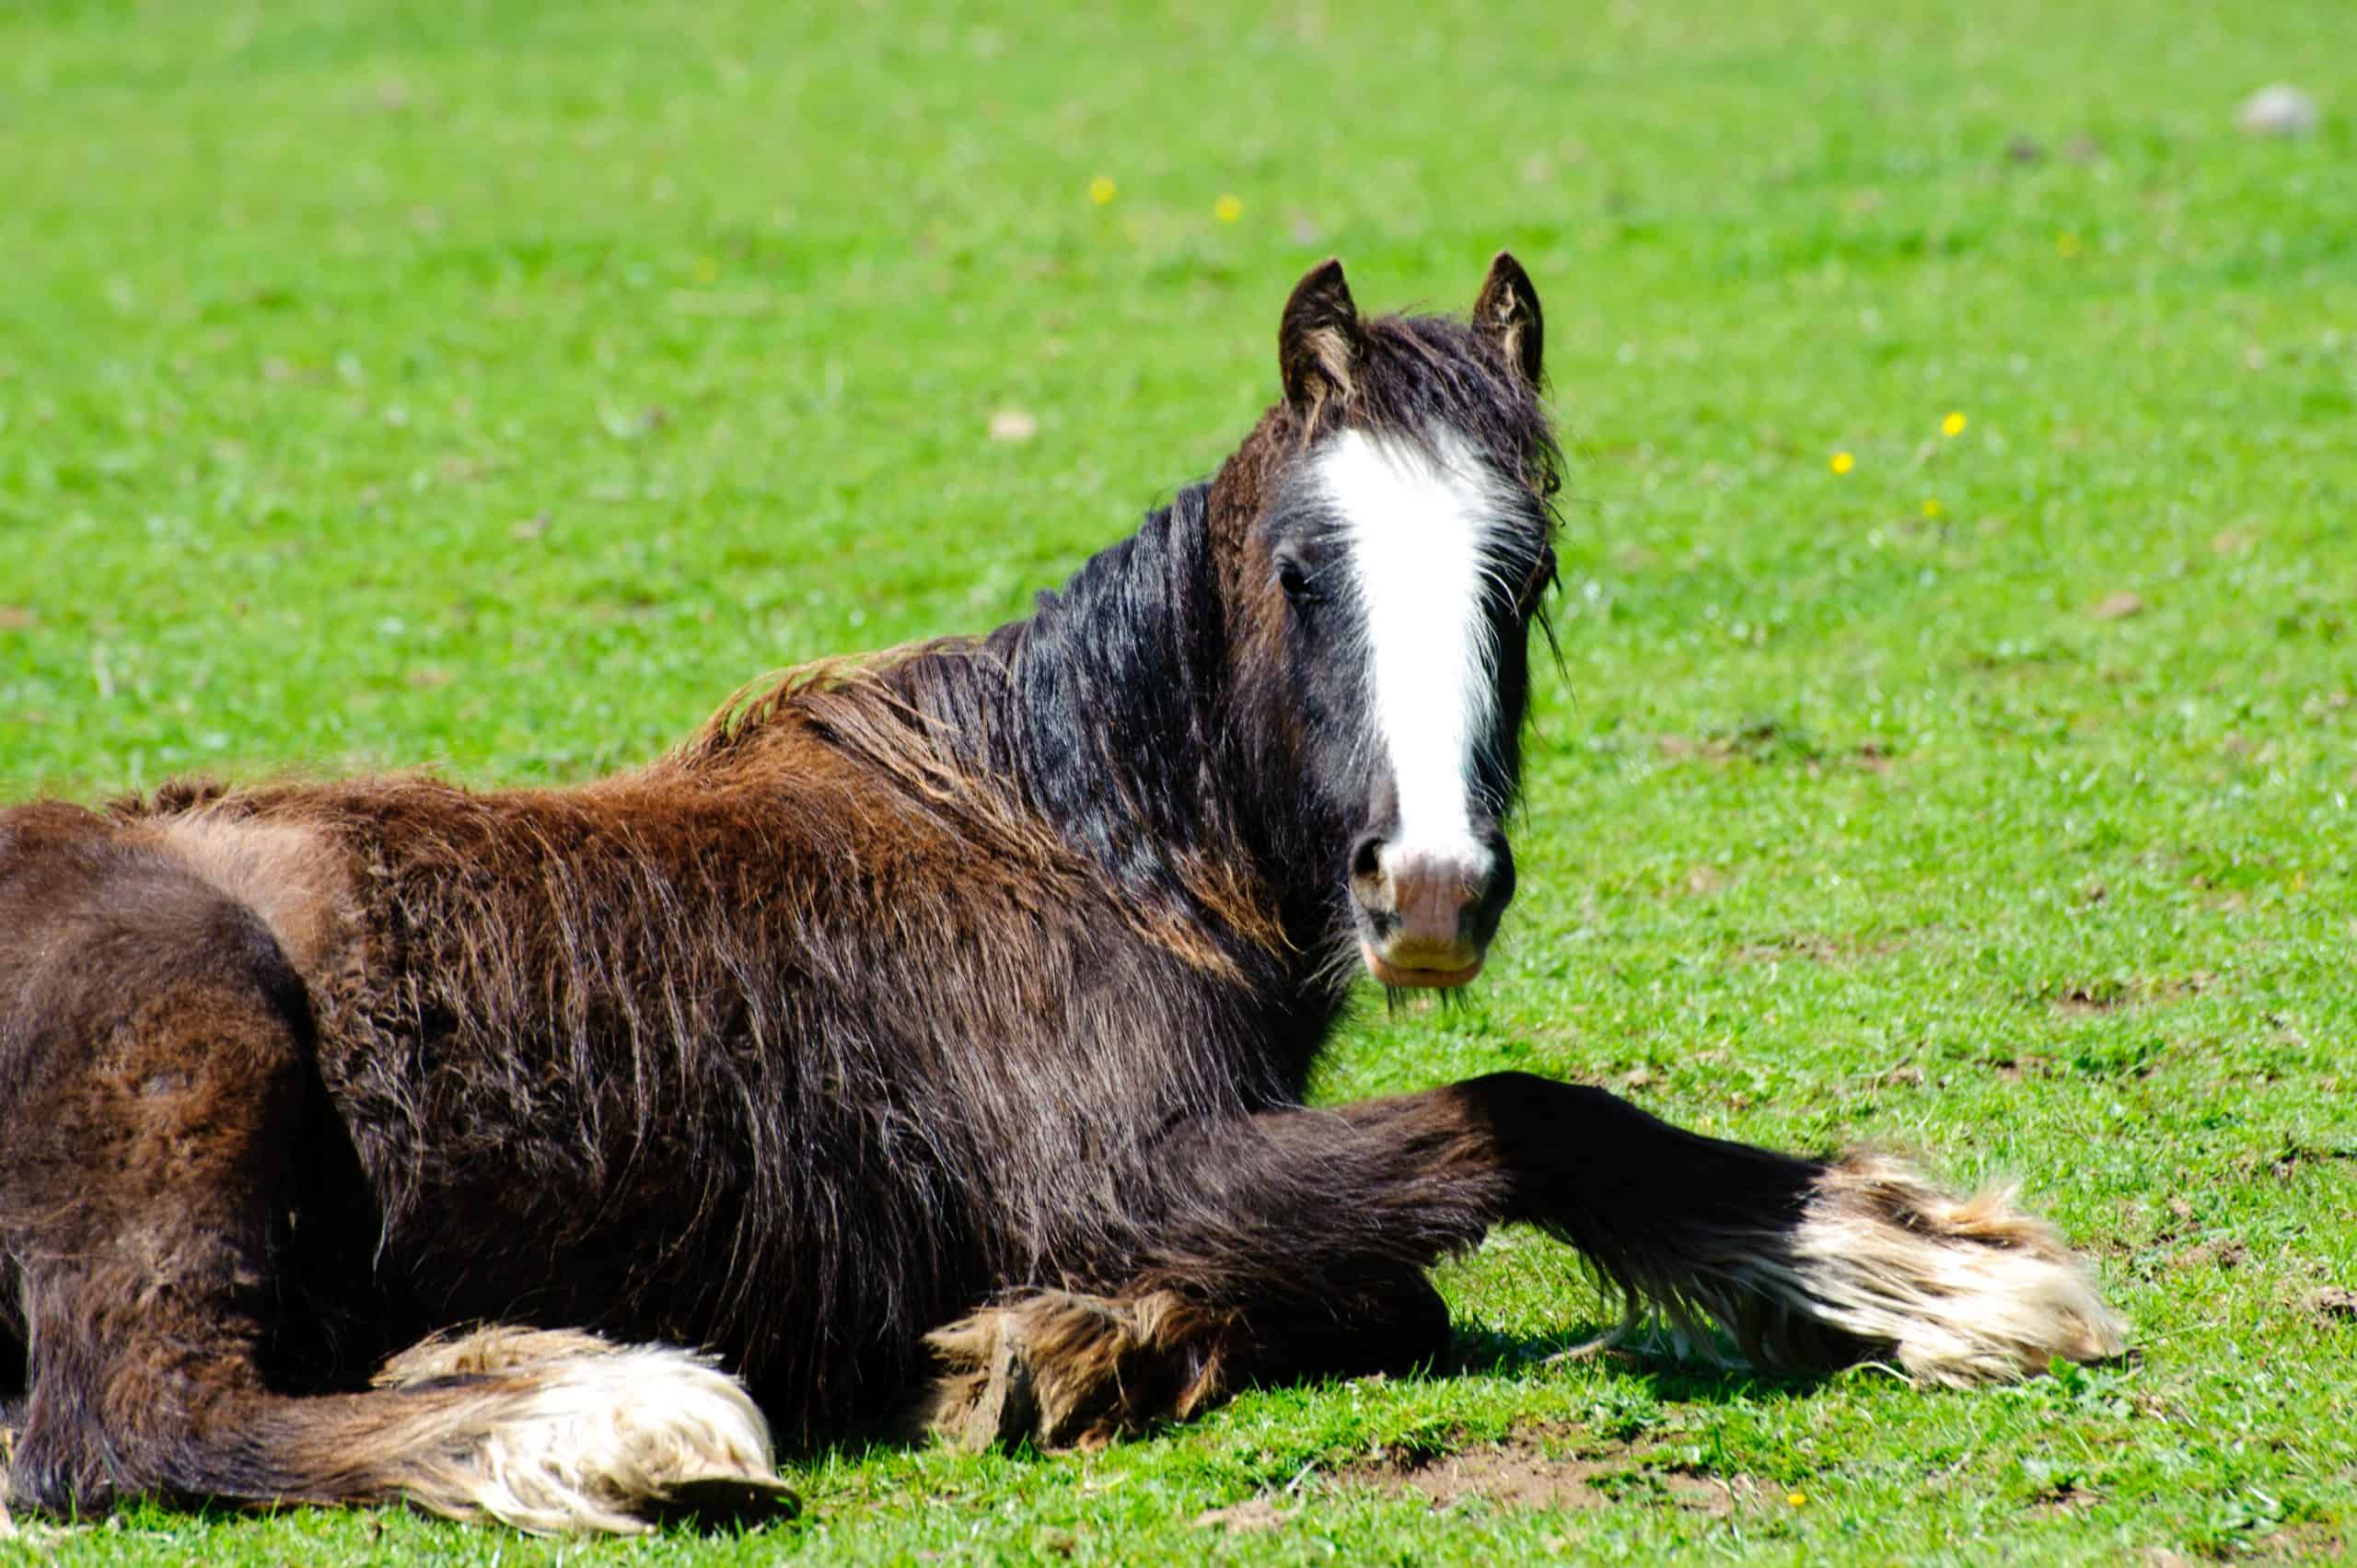 Rescued neglected horse resting and recovering in a green field.